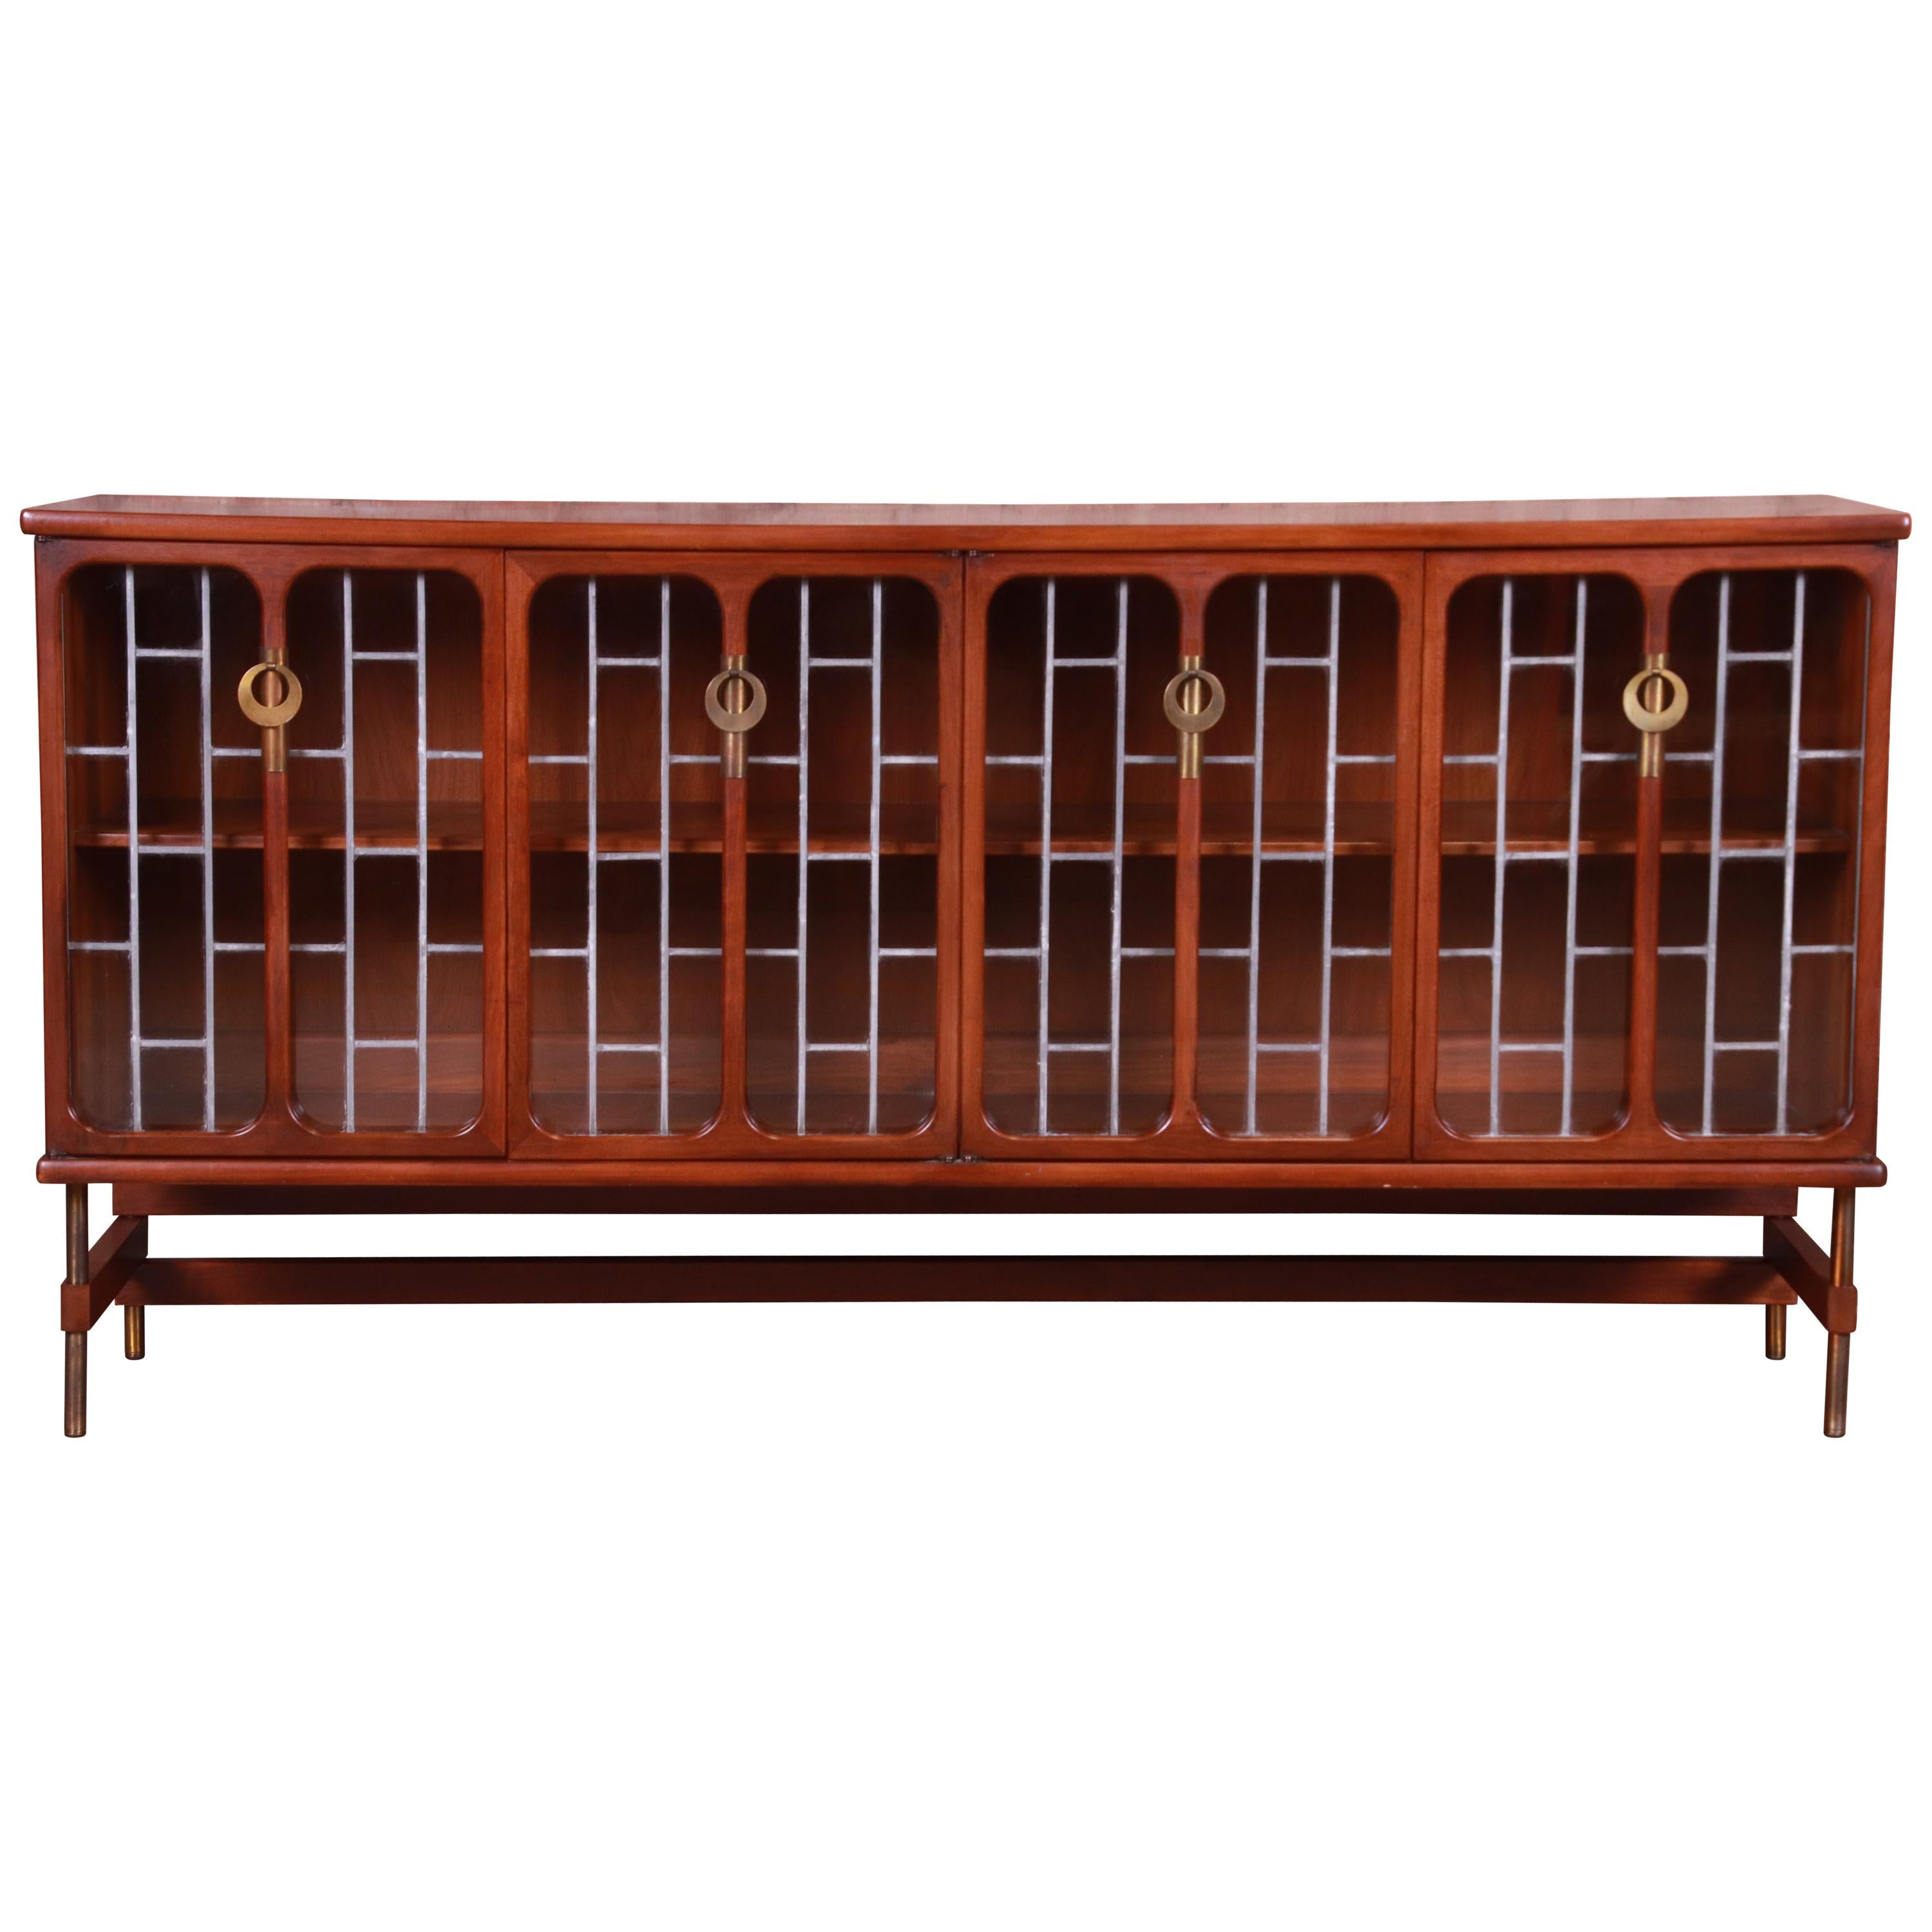 Mid-Century Modern Walnut Leaded Glass Bookcase by White Furniture, circa 1960s